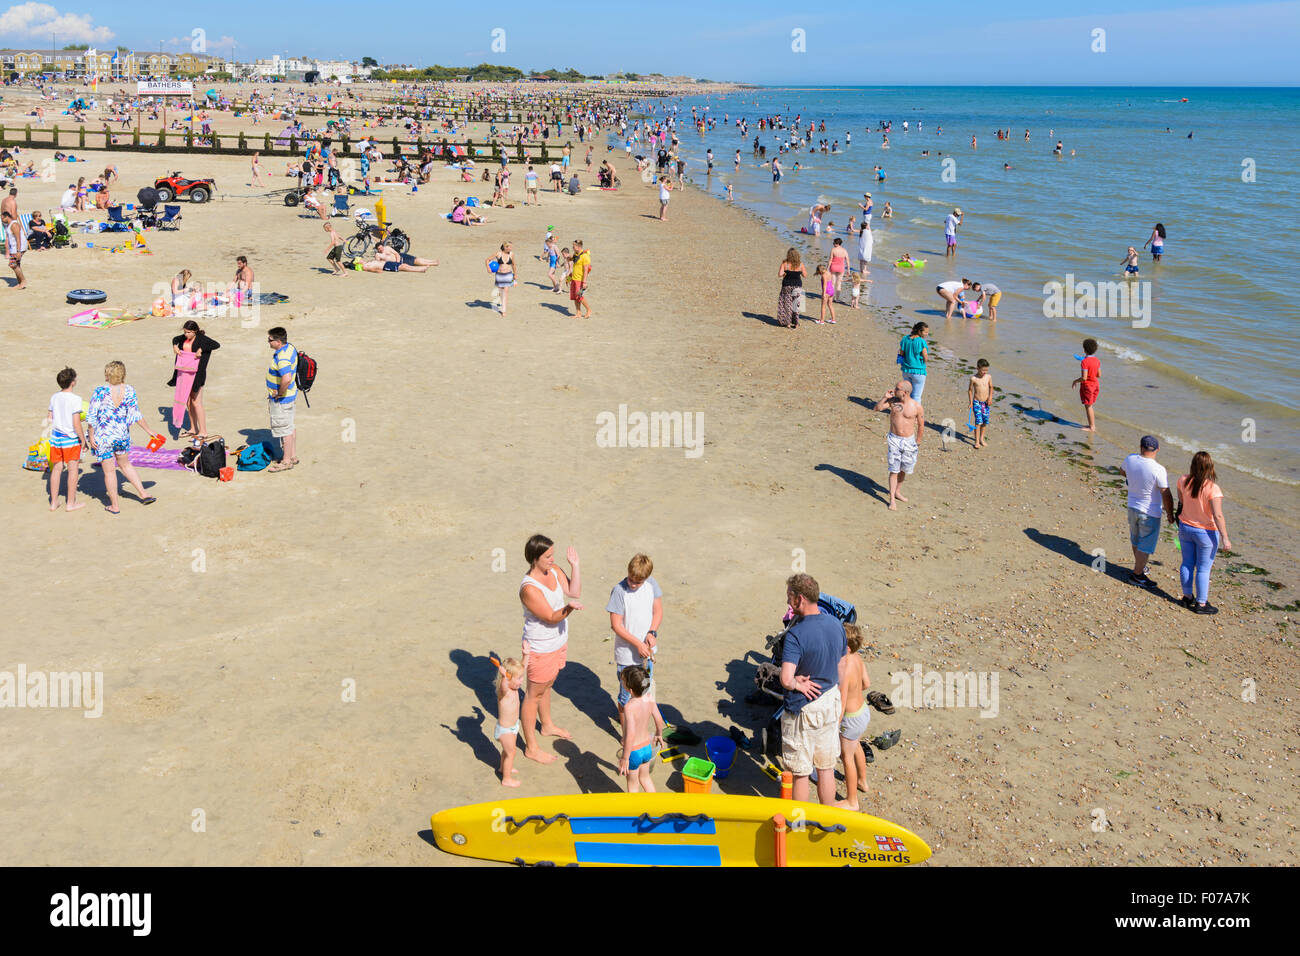 Busy 'Blue Flag' beach on a sunny day at Littlehampton, West Sussex, England, UK. Stock Photo